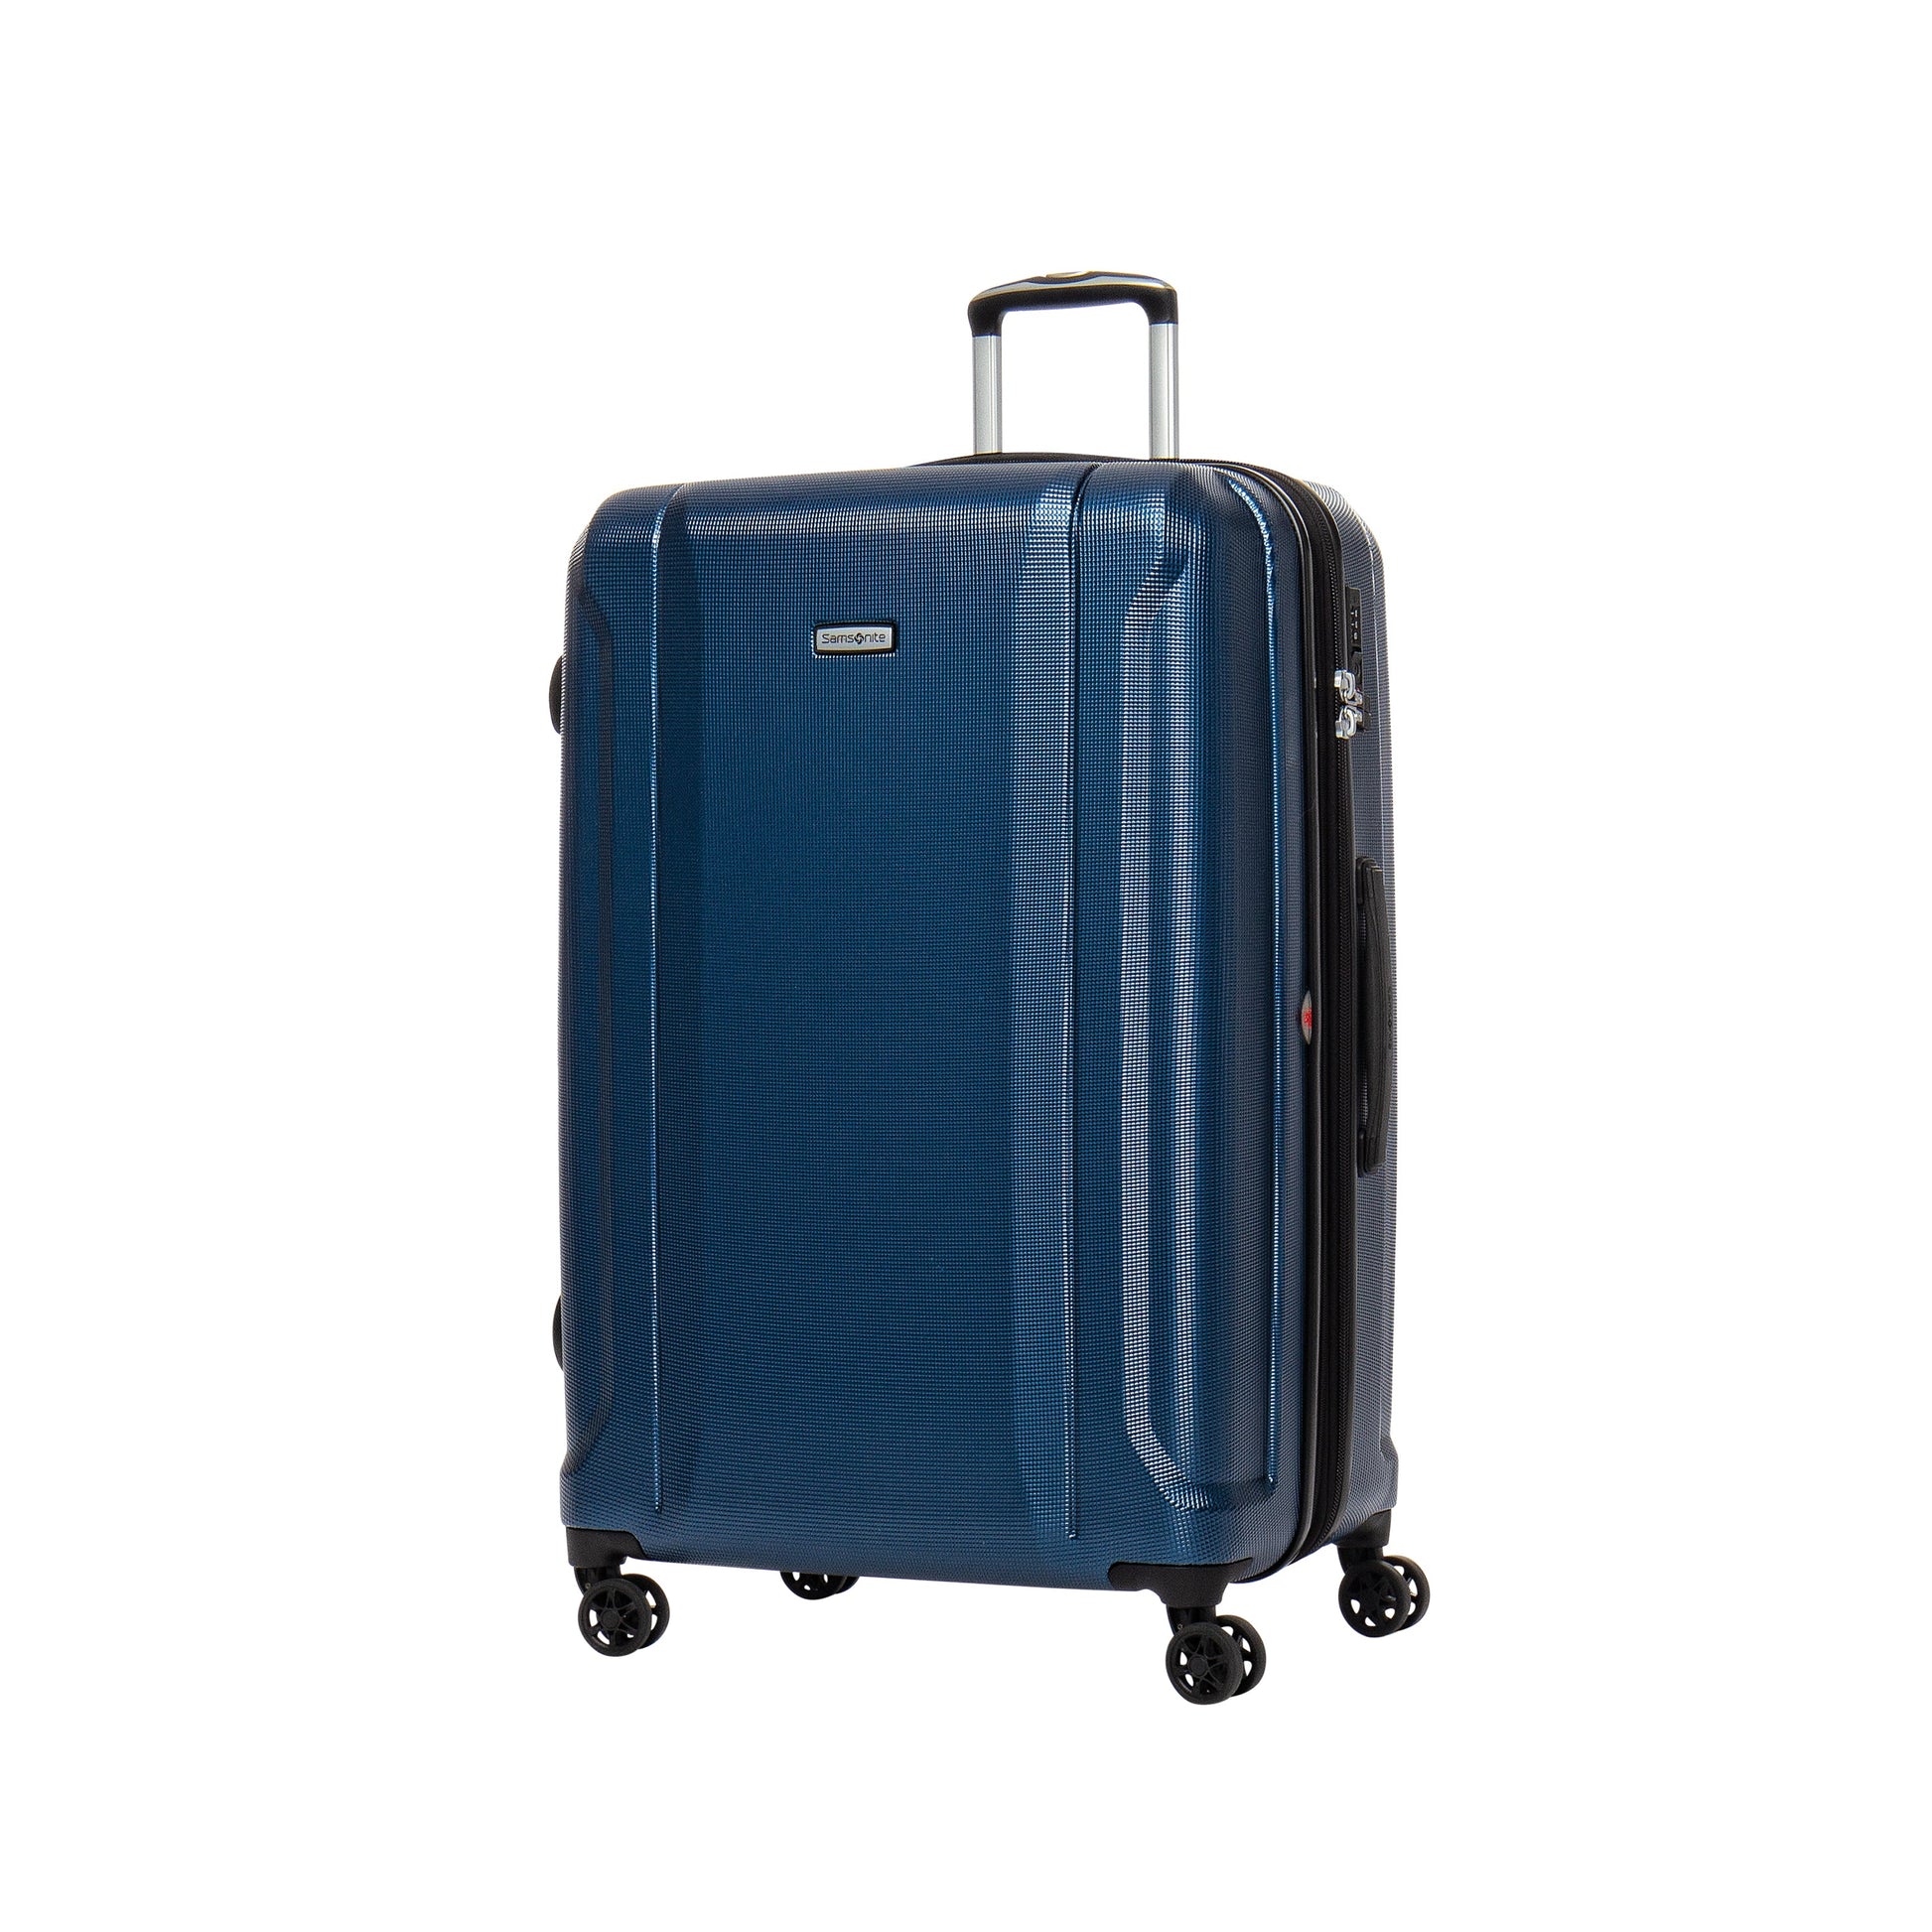 Samsonite Omni 3.0 - 2 Piece Spinner Expandable Luggage Set (Carry-On & Large)